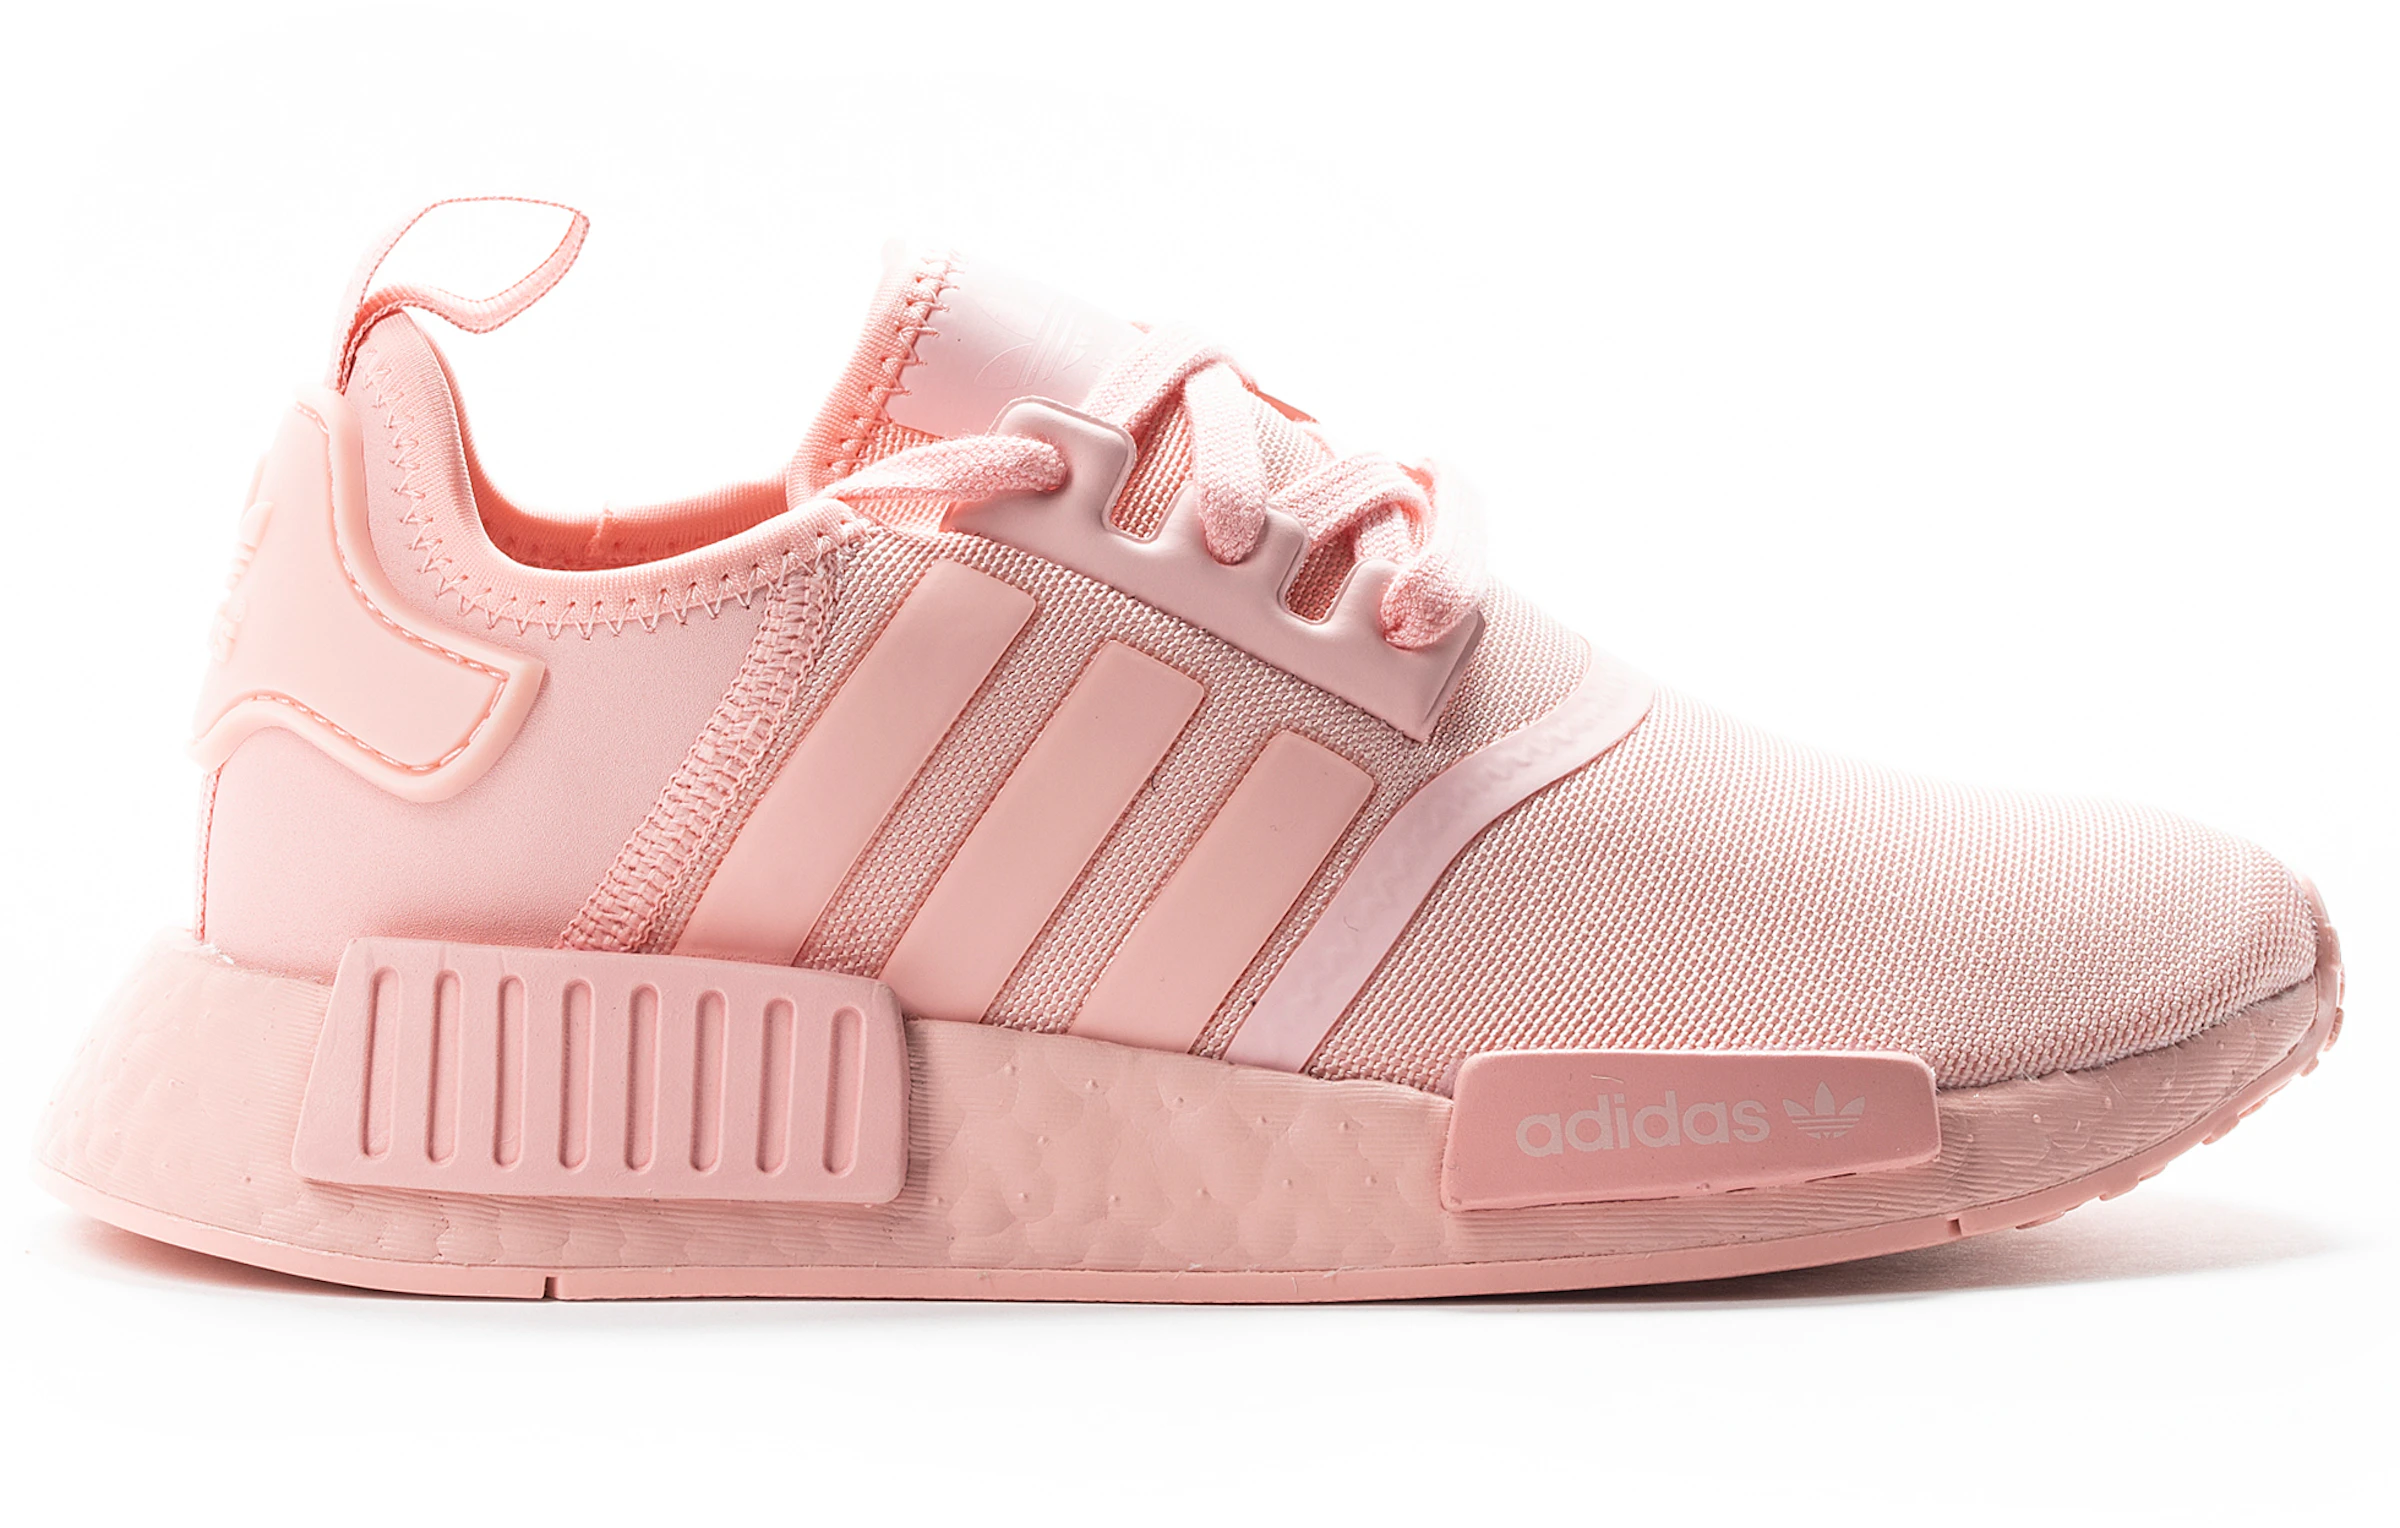 Empuje Intercambiar Provisional adidas NMD R1 Glow Pink (Youth) - FW4708 - MX